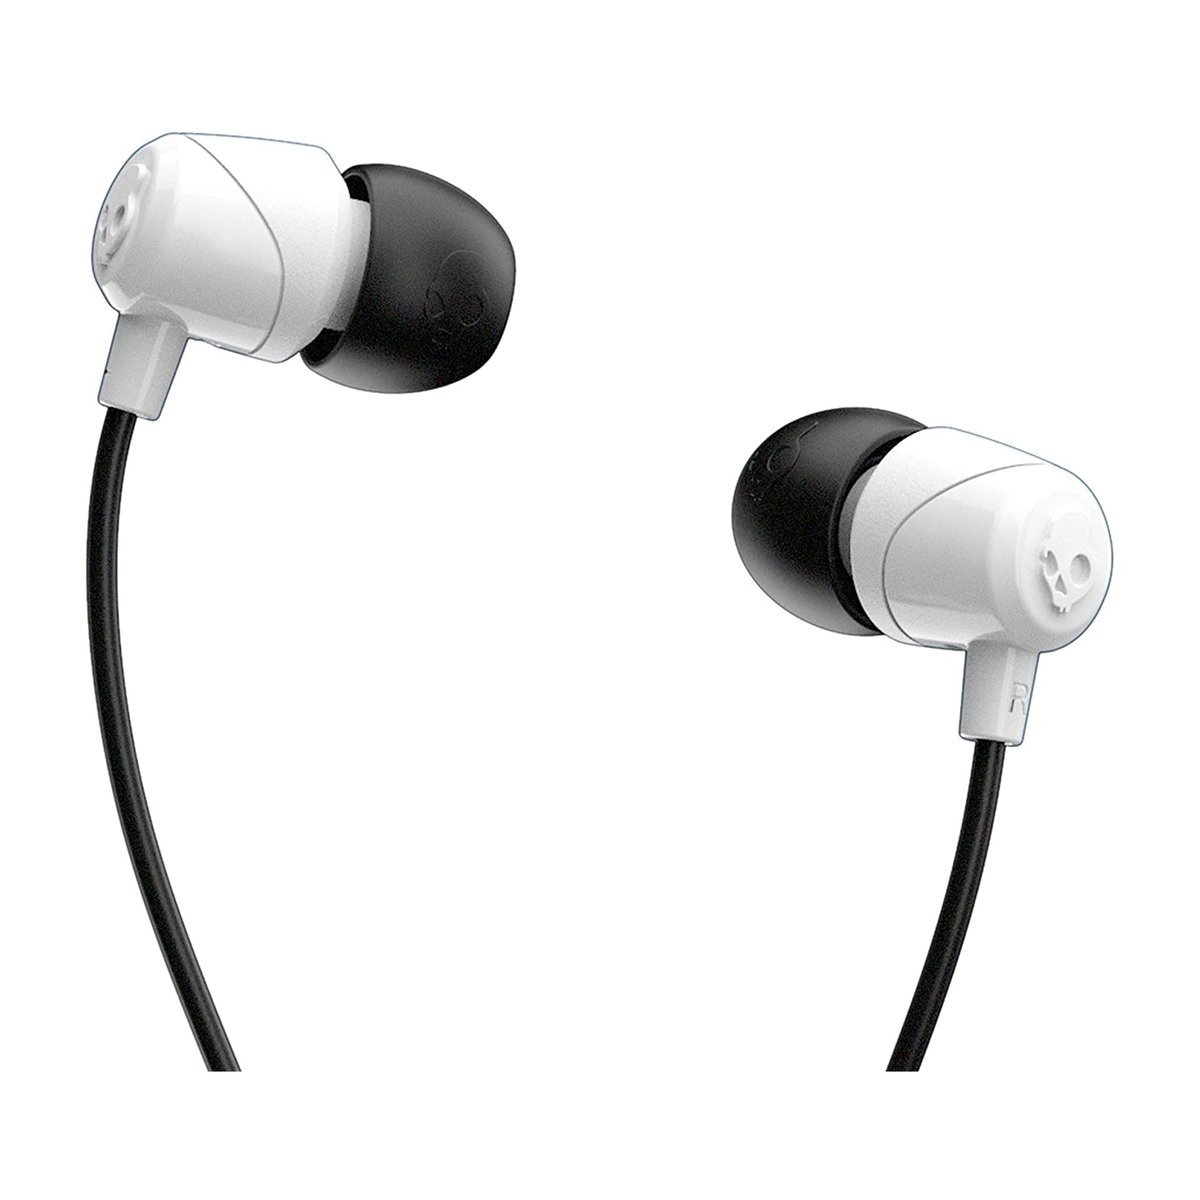 Skullcandy S2DUYK-441 Jib In-Ear Noise-Isolating Earbuds with Microphone and Remote for Hands-Free Calls - White/Black